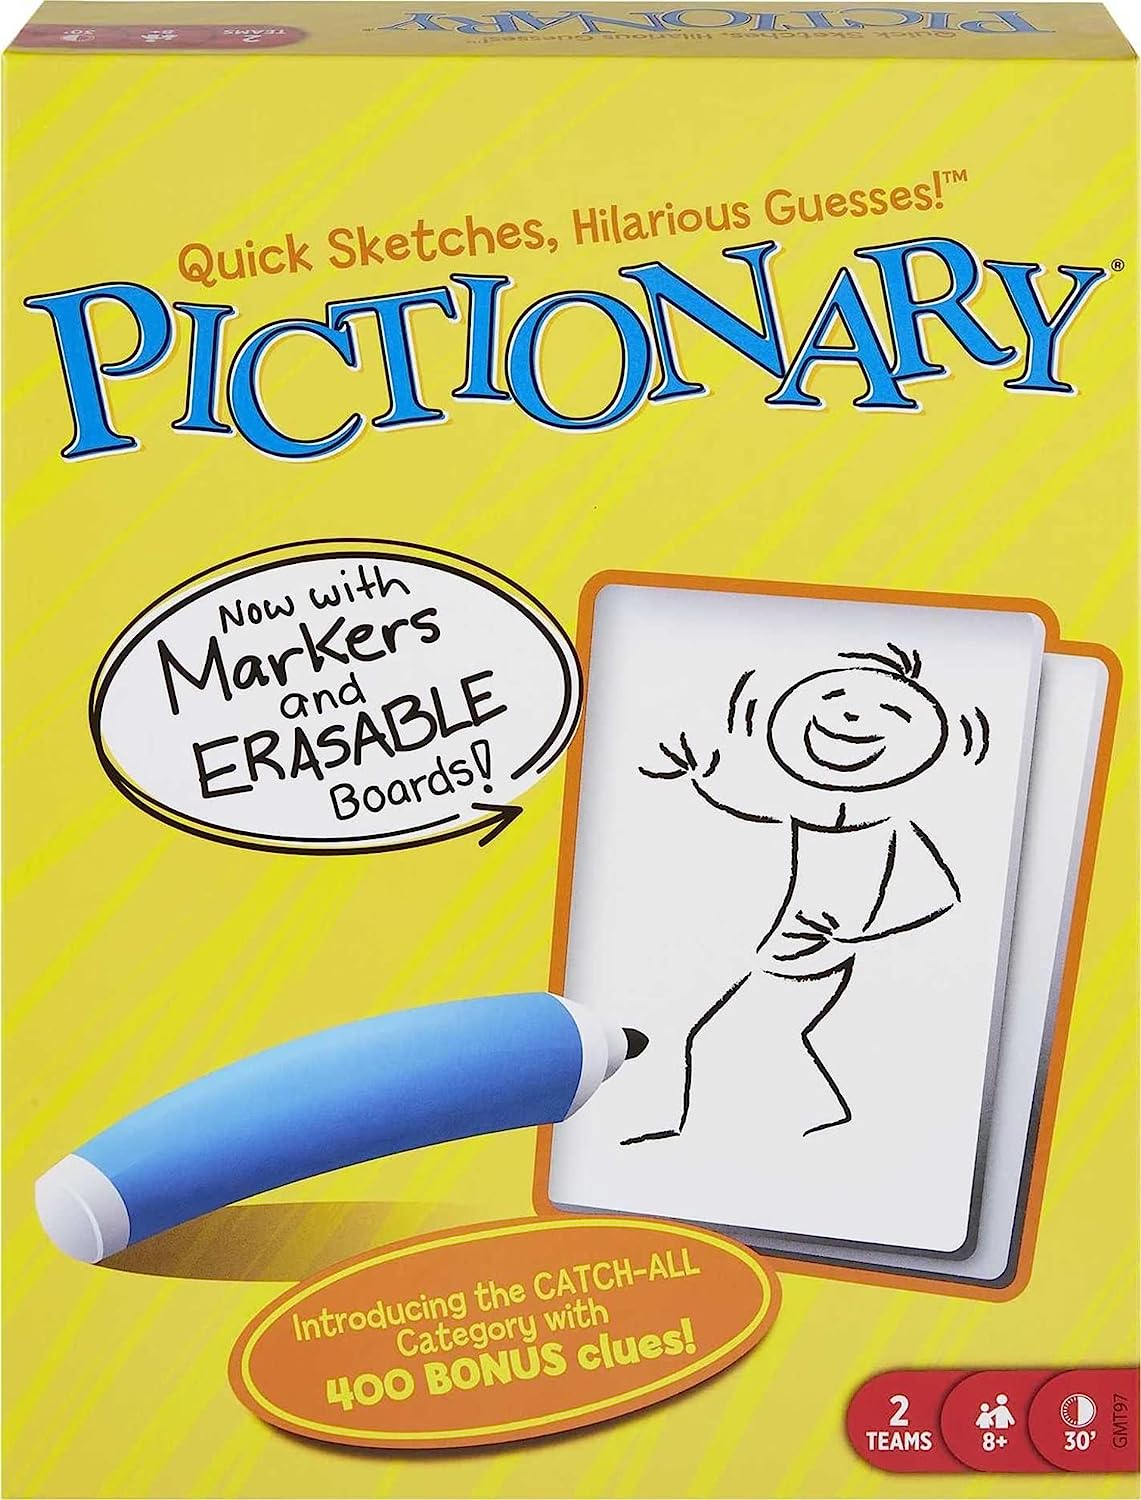 Classic Pictionary Board Game for Adults: Unleash Your Creativity!